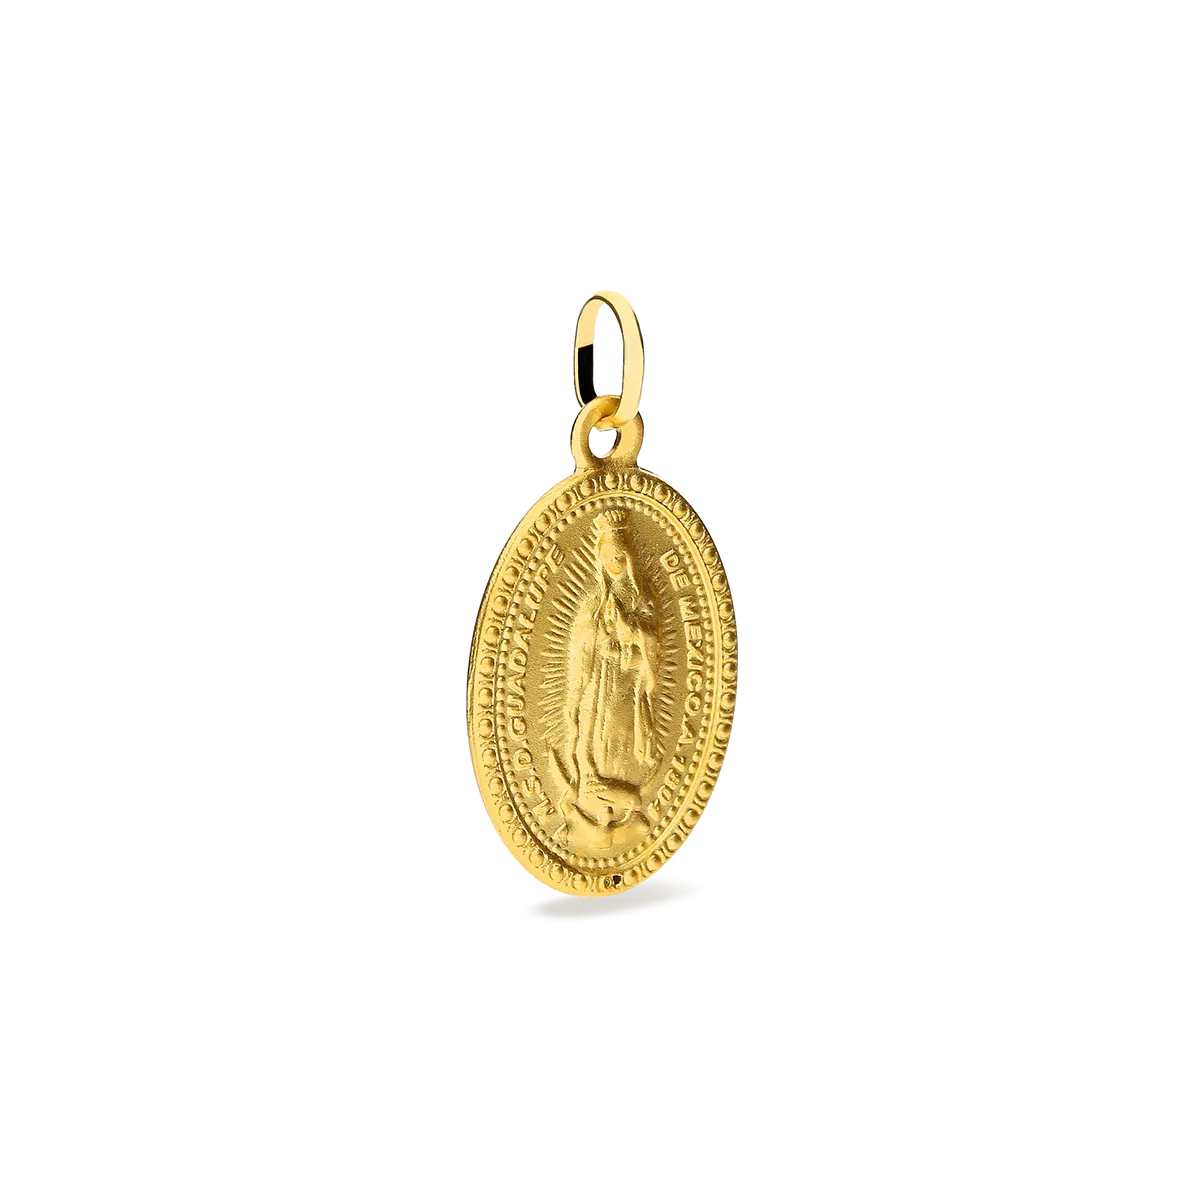 Medalla virgen guadalupe mexico oro 18 quilates 18x14mm